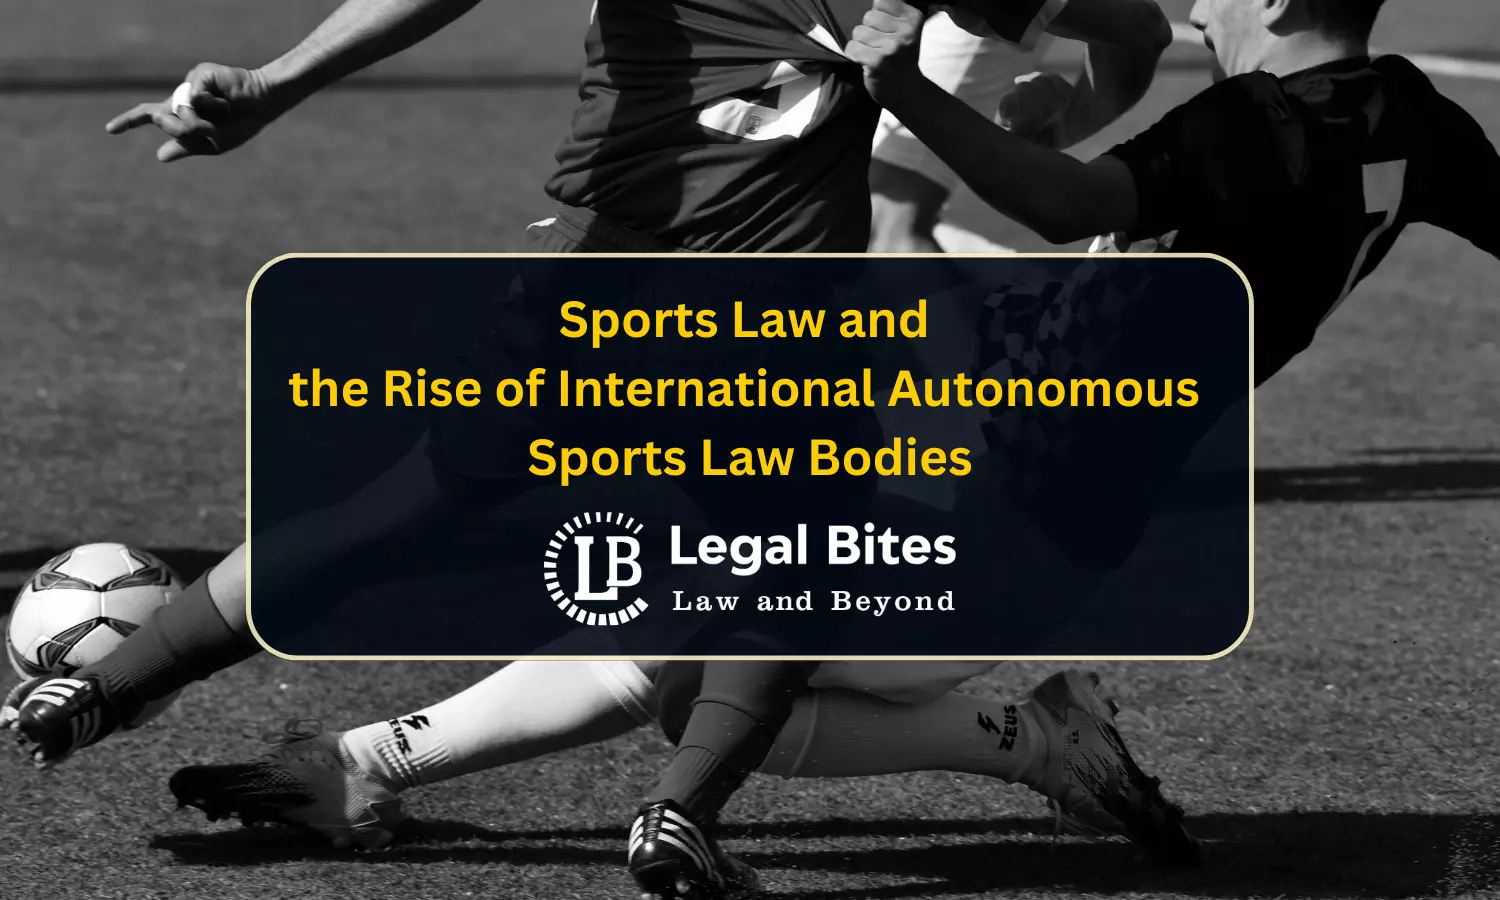 Sports Law and the Rise of International Autonomous Sports Law Bodies